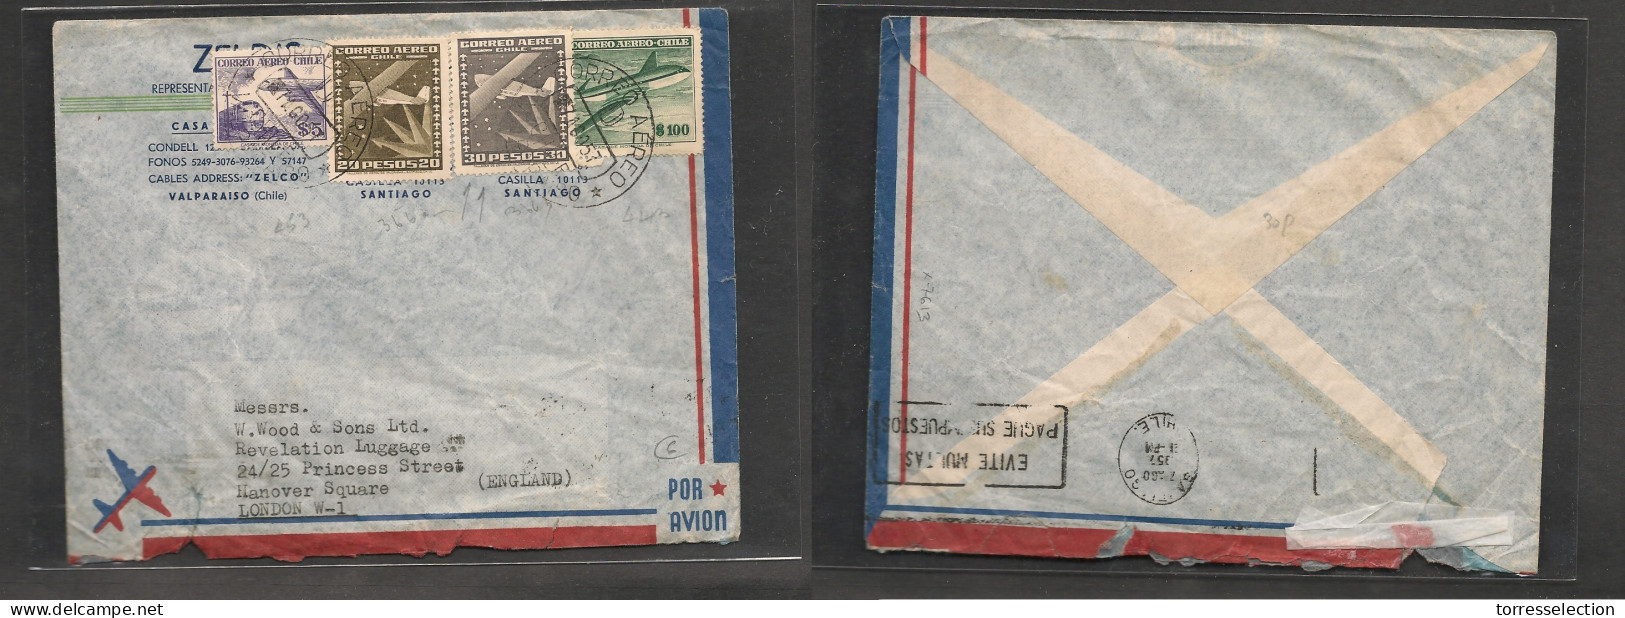 CHILE. Chile Cover - 1957 Valp To London UK Air Mult Fkd Env 175 Pesos Rate Incl 50p Fine Usage - Chili